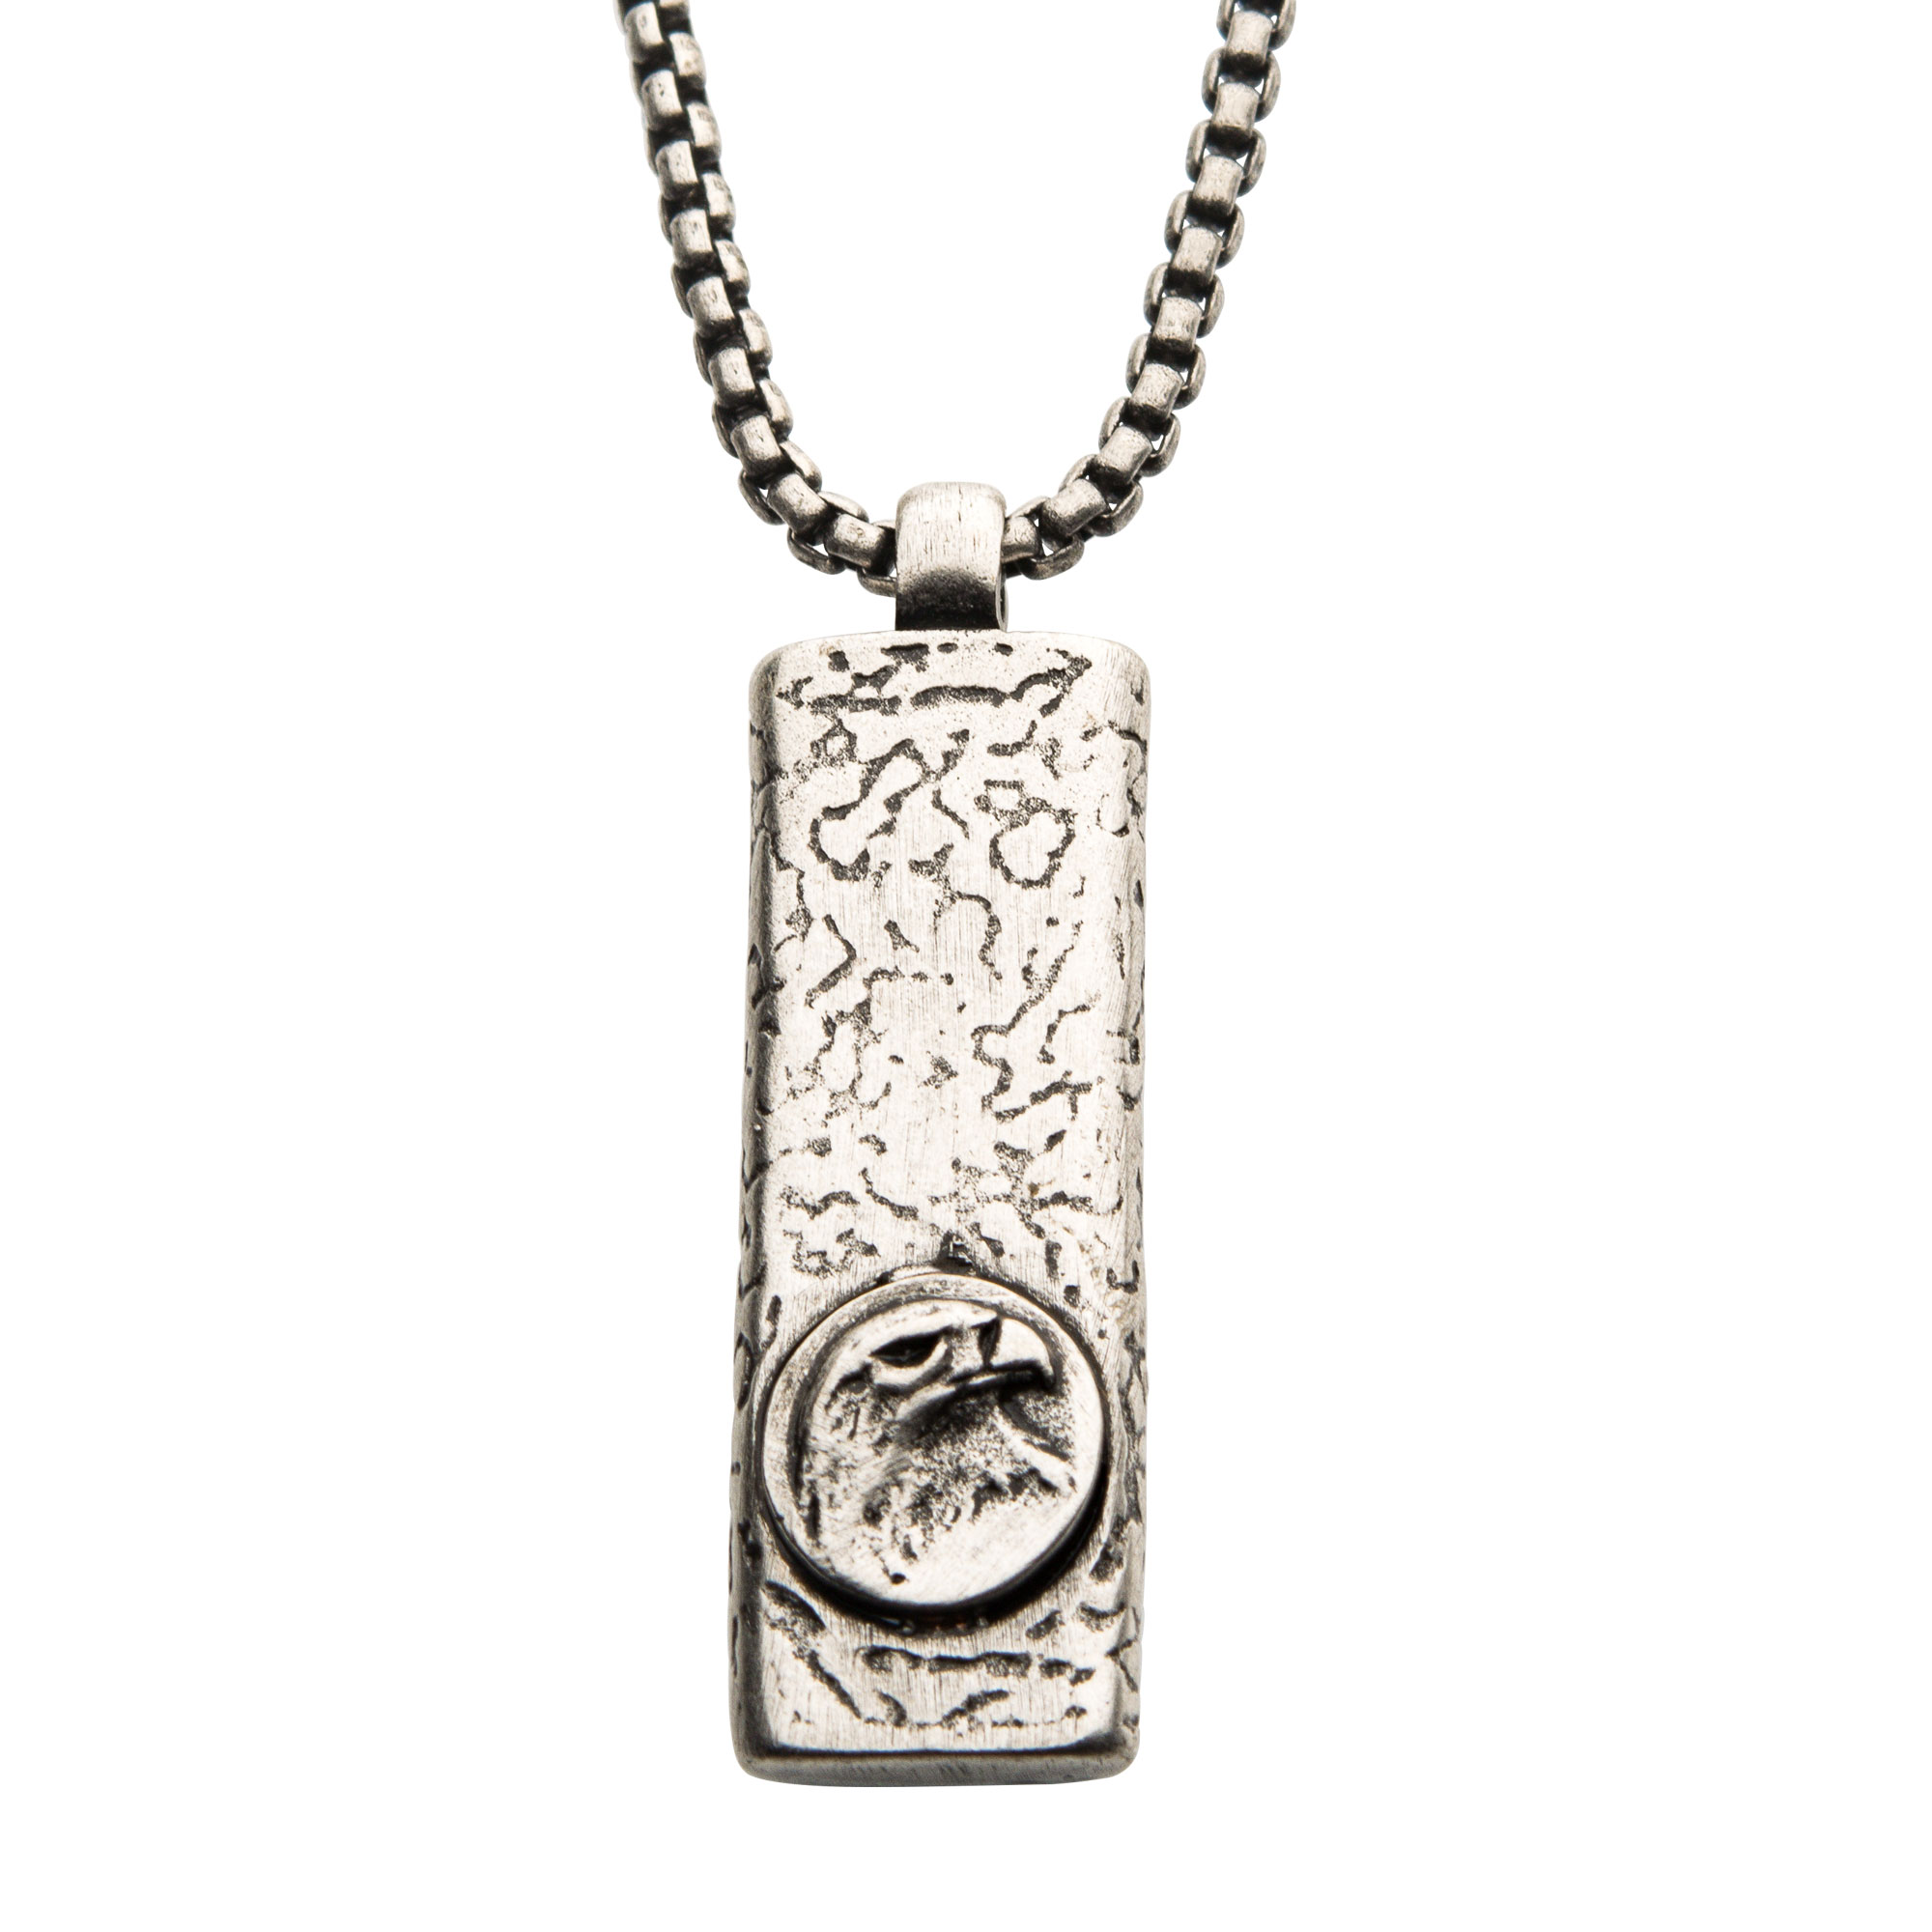 Stainless Steel Silver Plated Dog Tag Pendant with Eagle Head Inlay, with Steel Box Chain Morin Jewelers Southbridge, MA